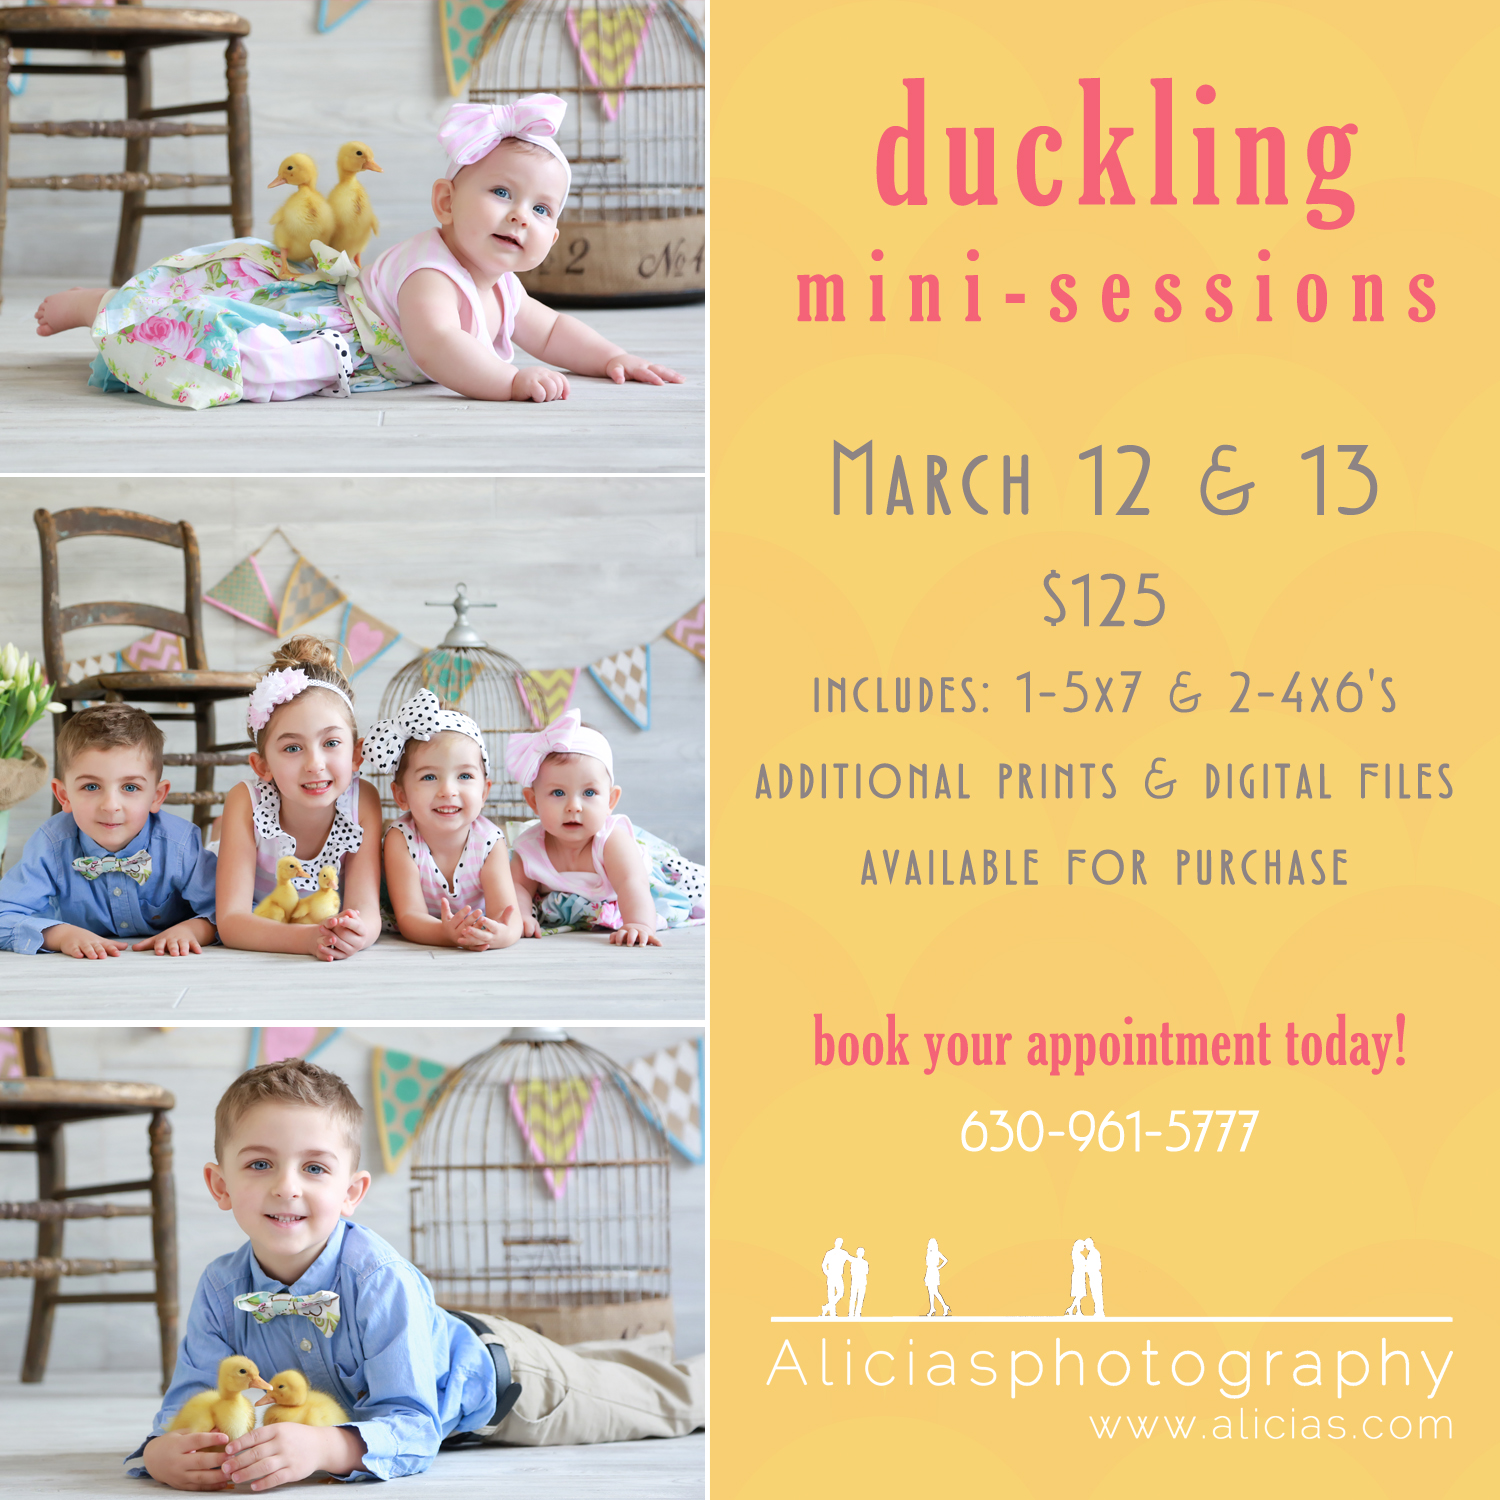 Chicago Naperville Easter Duckling Sessions